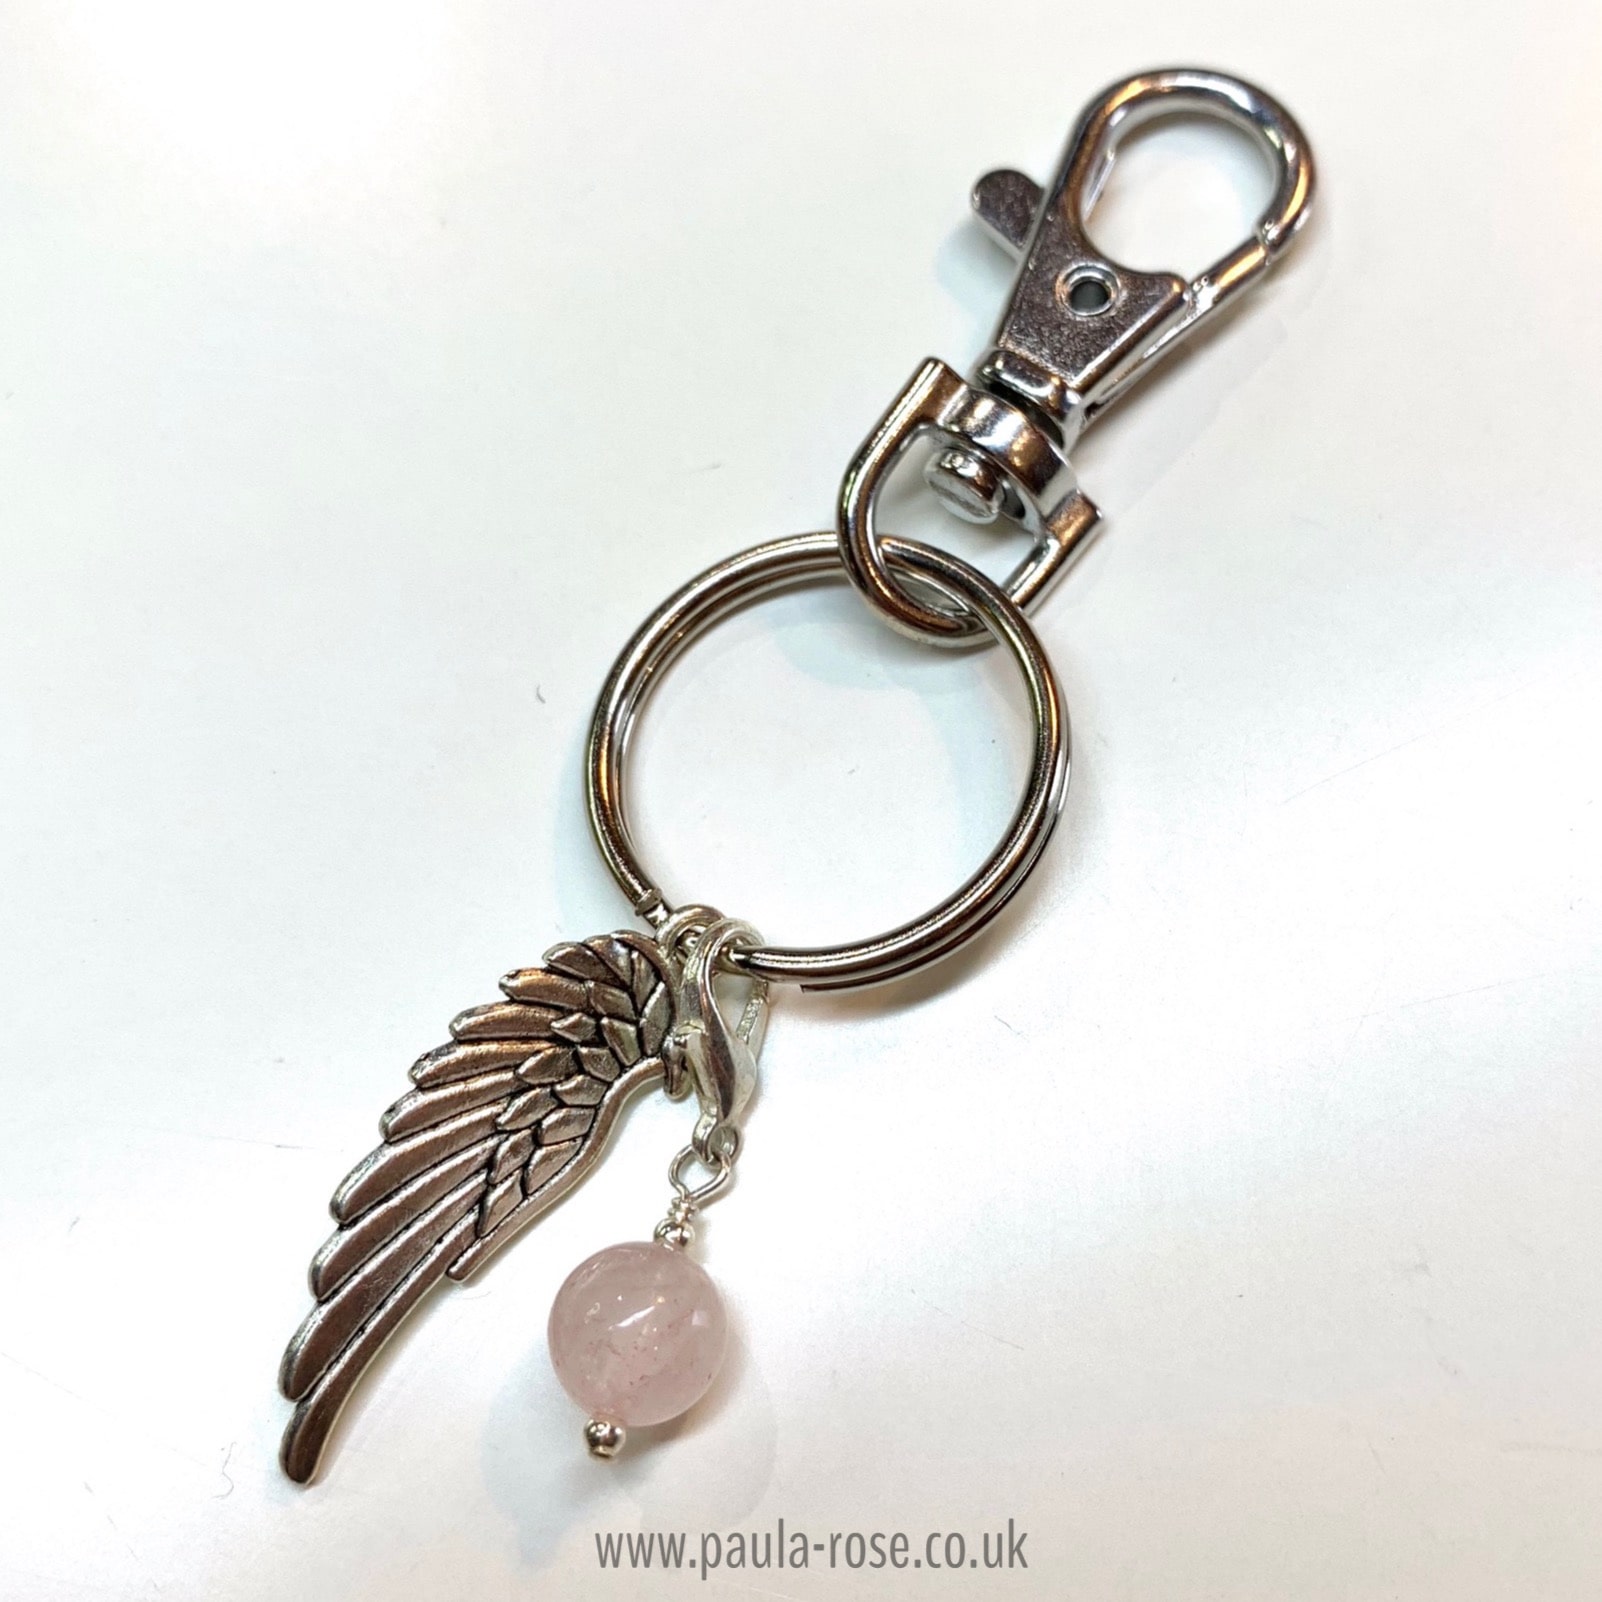 Pearl Keychain Birthday White, Pink Pearl Angel Wing Guardian Angel Keyring with Organza Bags and Thank You Tags for Christmas 20 Pieces Gift Keychains Angel Pendant Keychain Wedding 